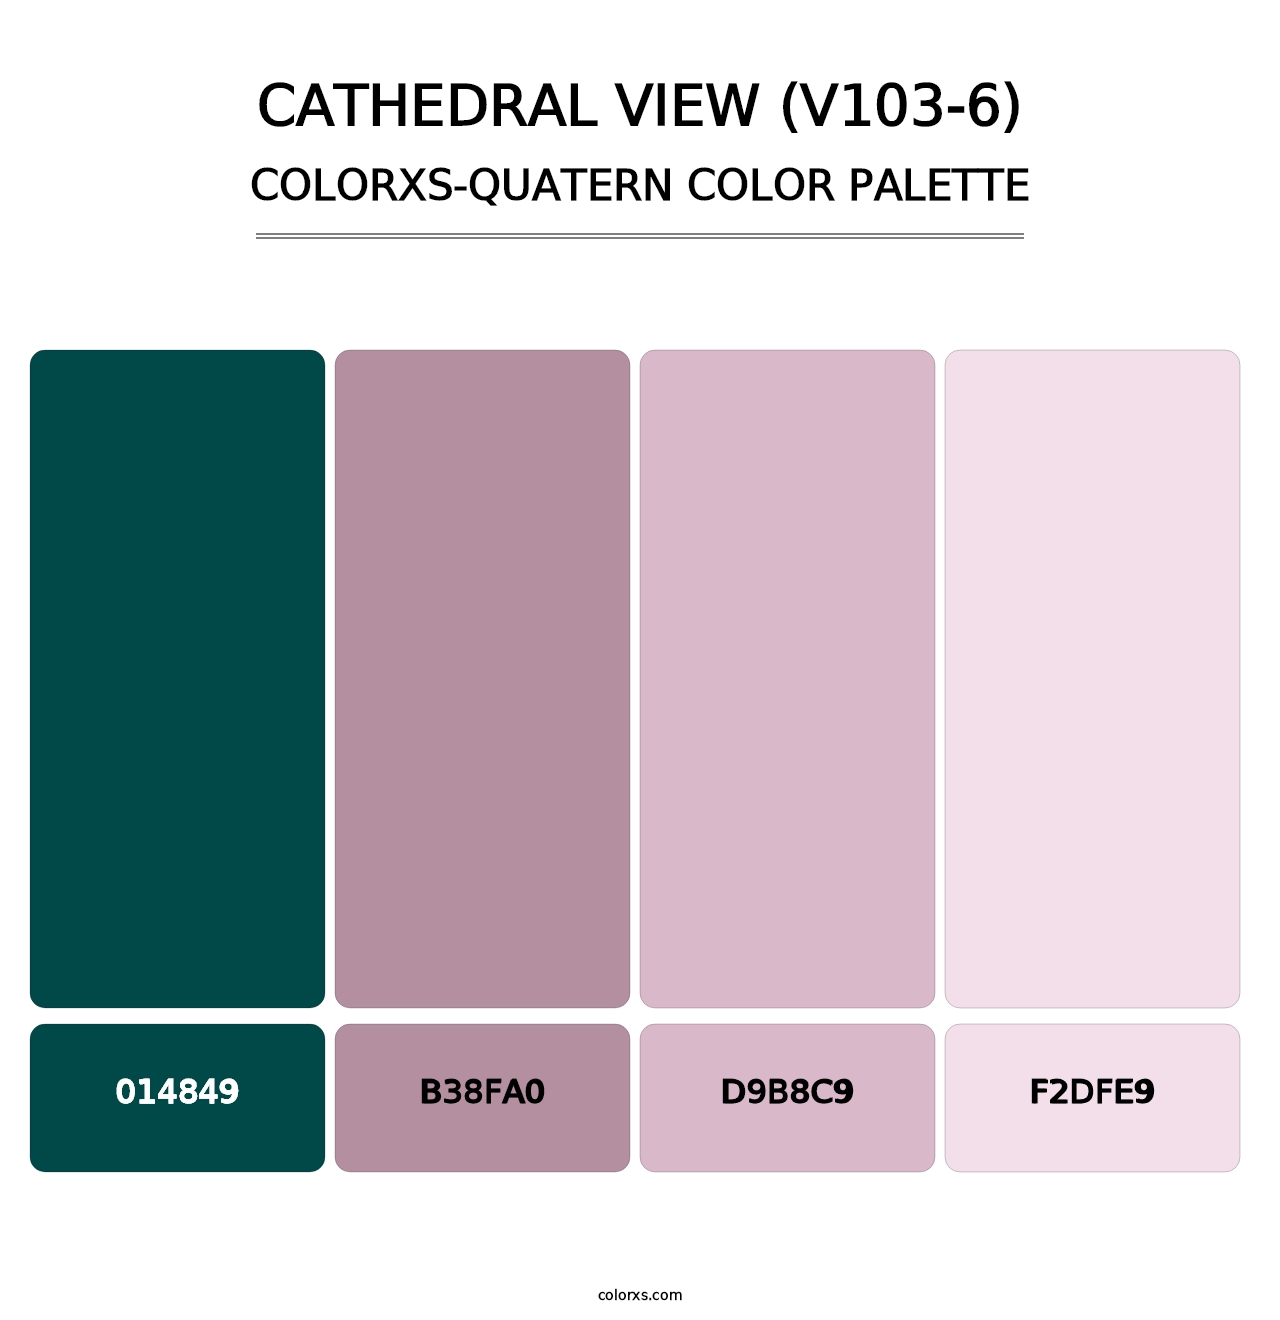 Cathedral View (V103-6) - Colorxs Quatern Palette